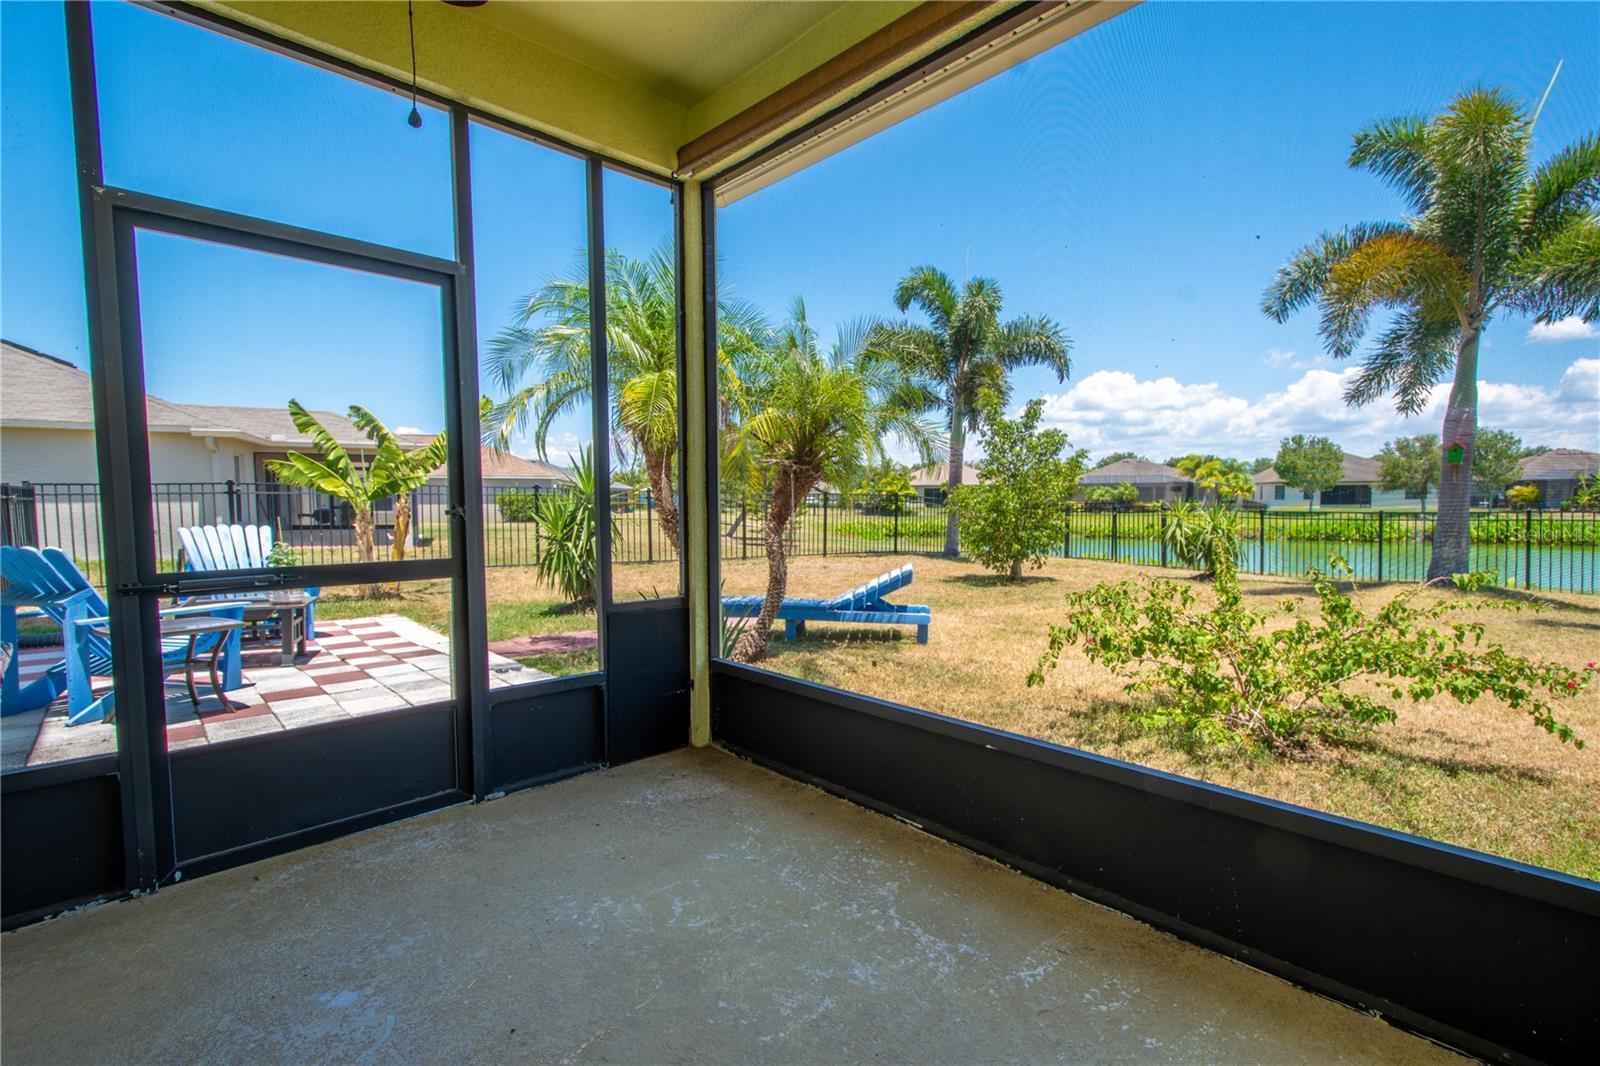 The screened in lanai features a serene lake view.